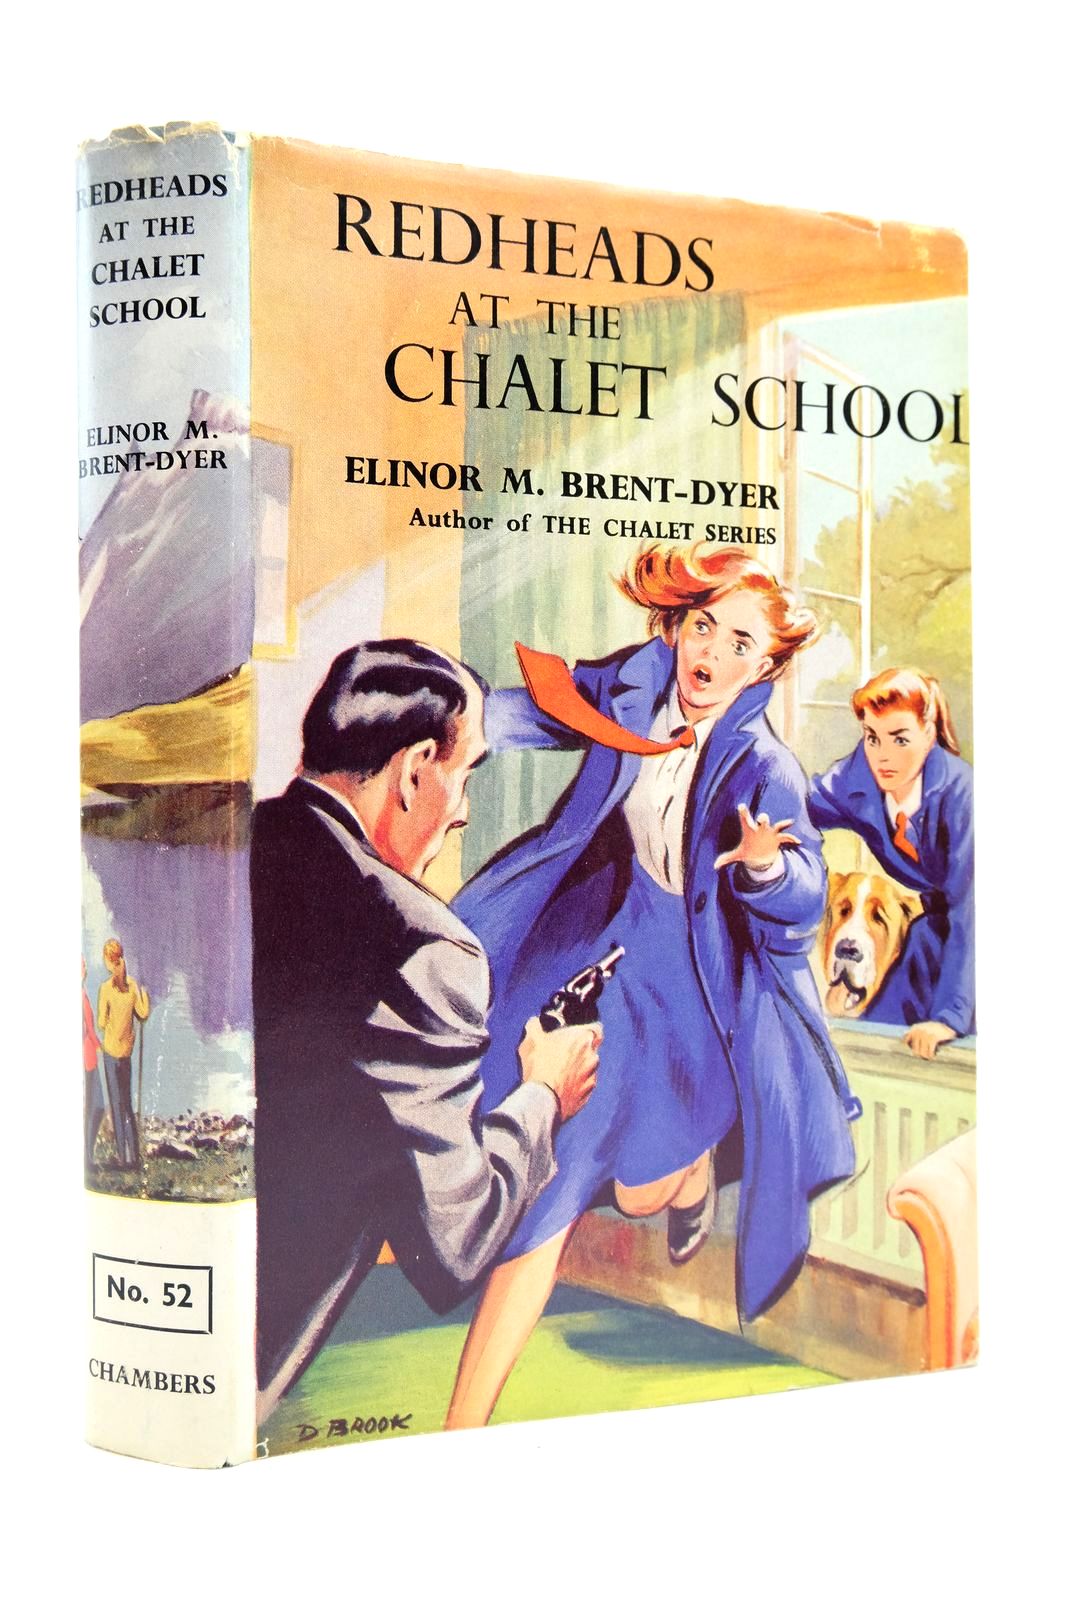 Photo of REDHEADS AT THE CHALET SCHOOL written by Brent-Dyer, Elinor M. illustrated by Brook, D. published by W. &amp; R. Chambers Limited (STOCK CODE: 2140064)  for sale by Stella & Rose's Books